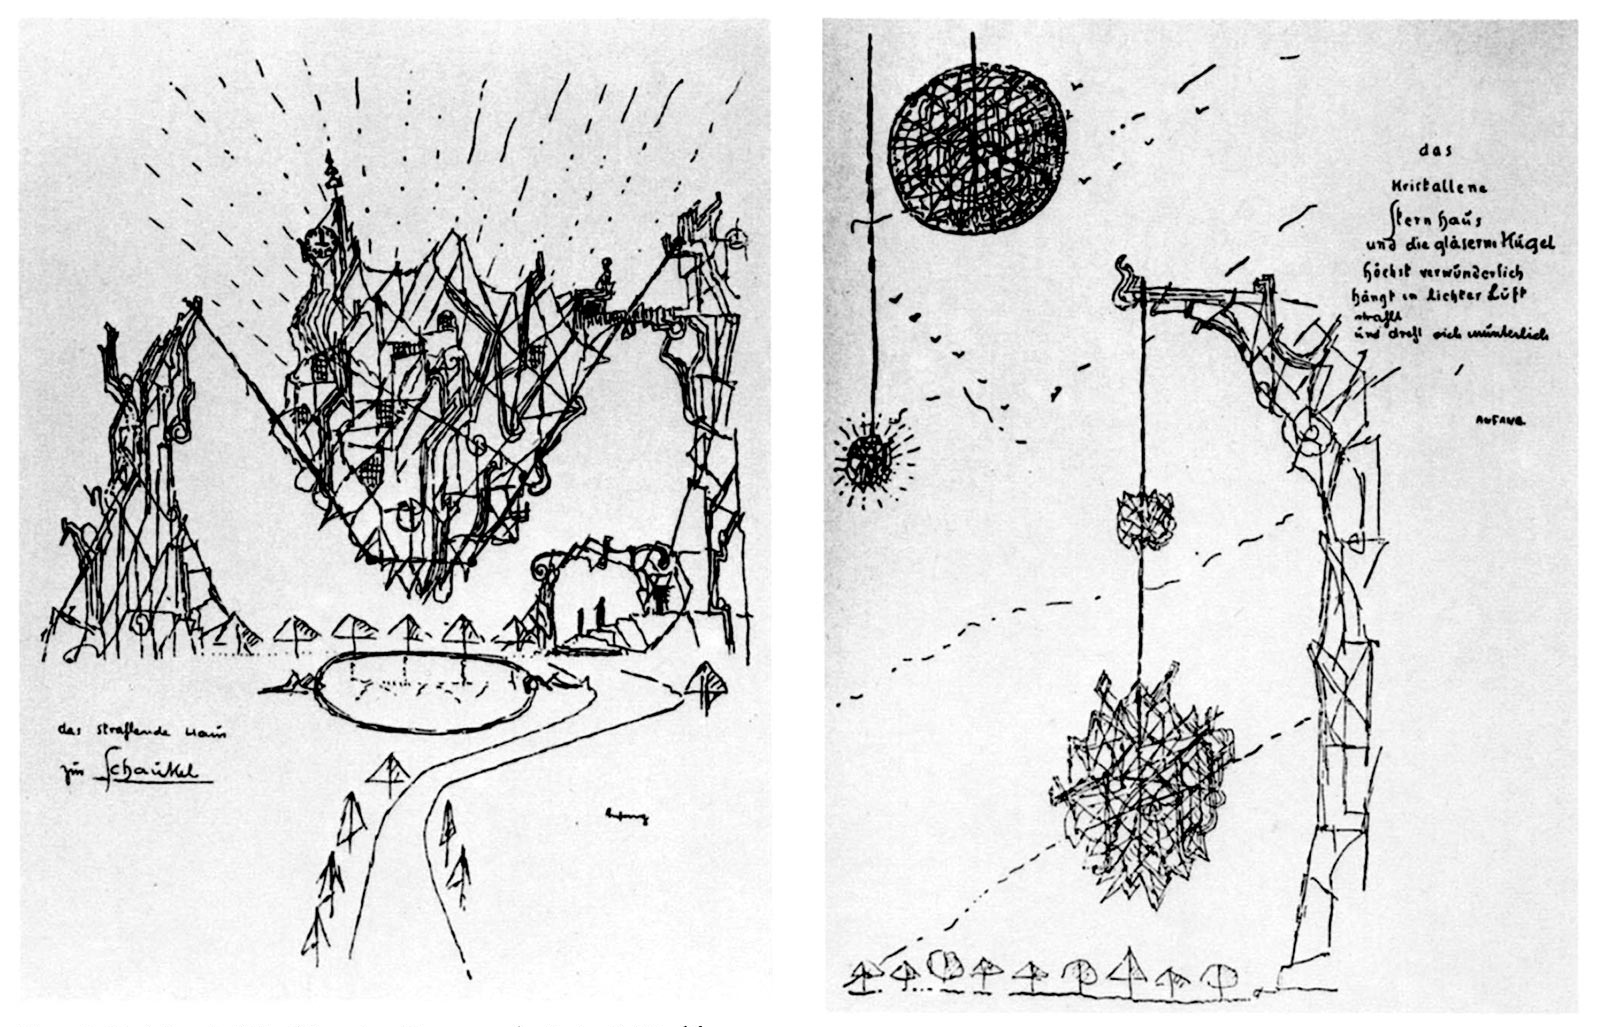 Carl Krayl, “The Gleaming House on the Swing” and “The Crystalline Star House and the Glass Sphere.” The sketches were originally published in Bruno Taut’s magazine Frühlicht in 1920.